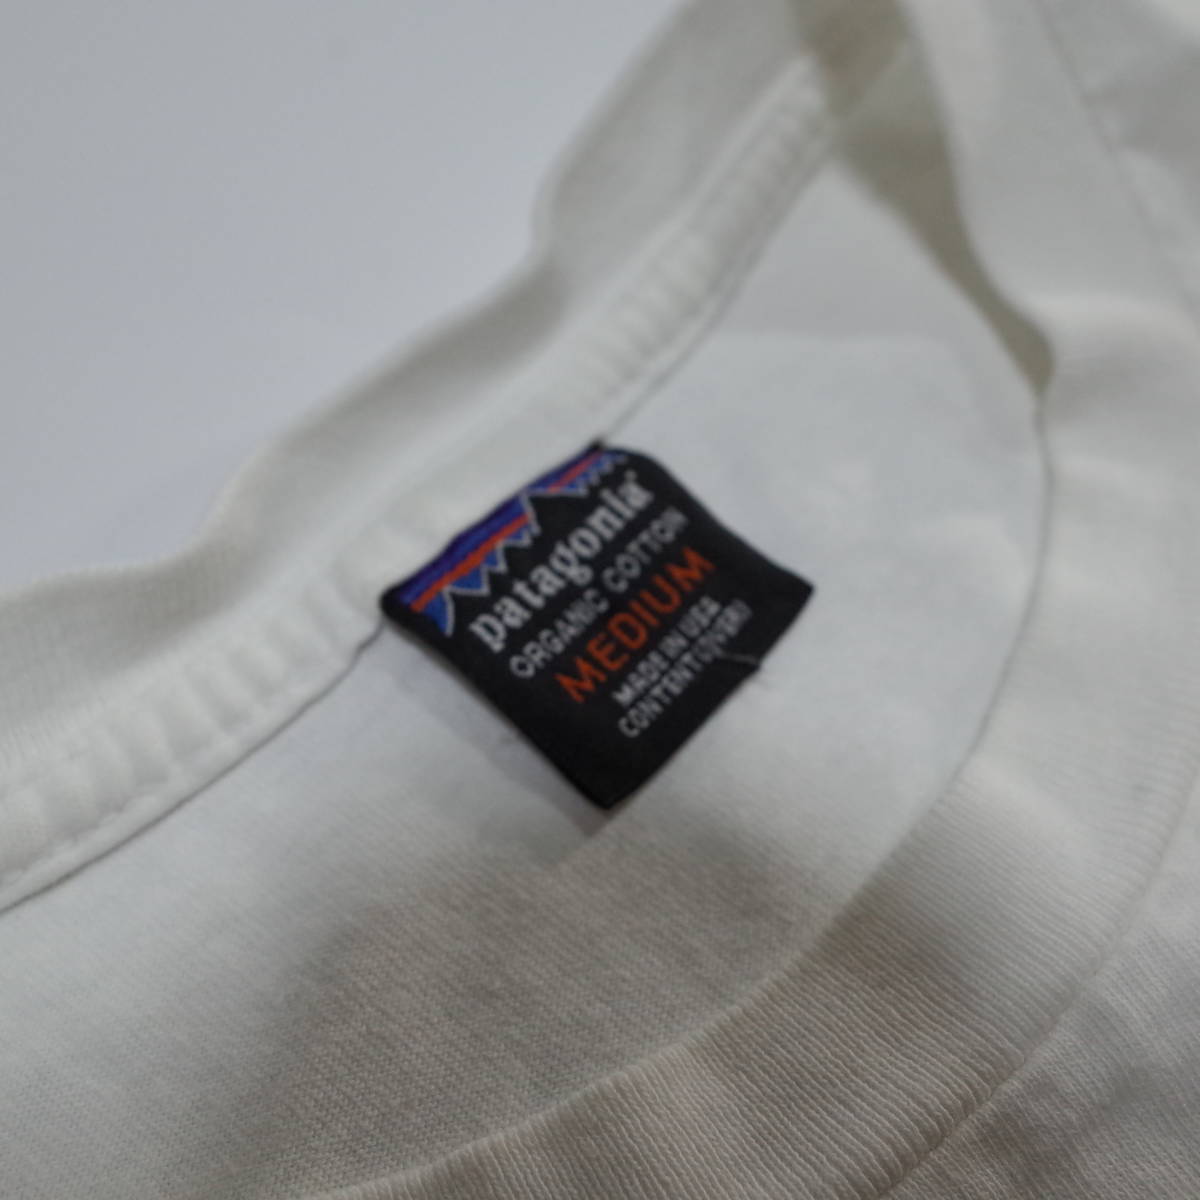 patagonia パタゴニア Waves are Borrowed Memories Owned Tシャツ No.2 レア 90S 初期 vintage ヴィンテージ